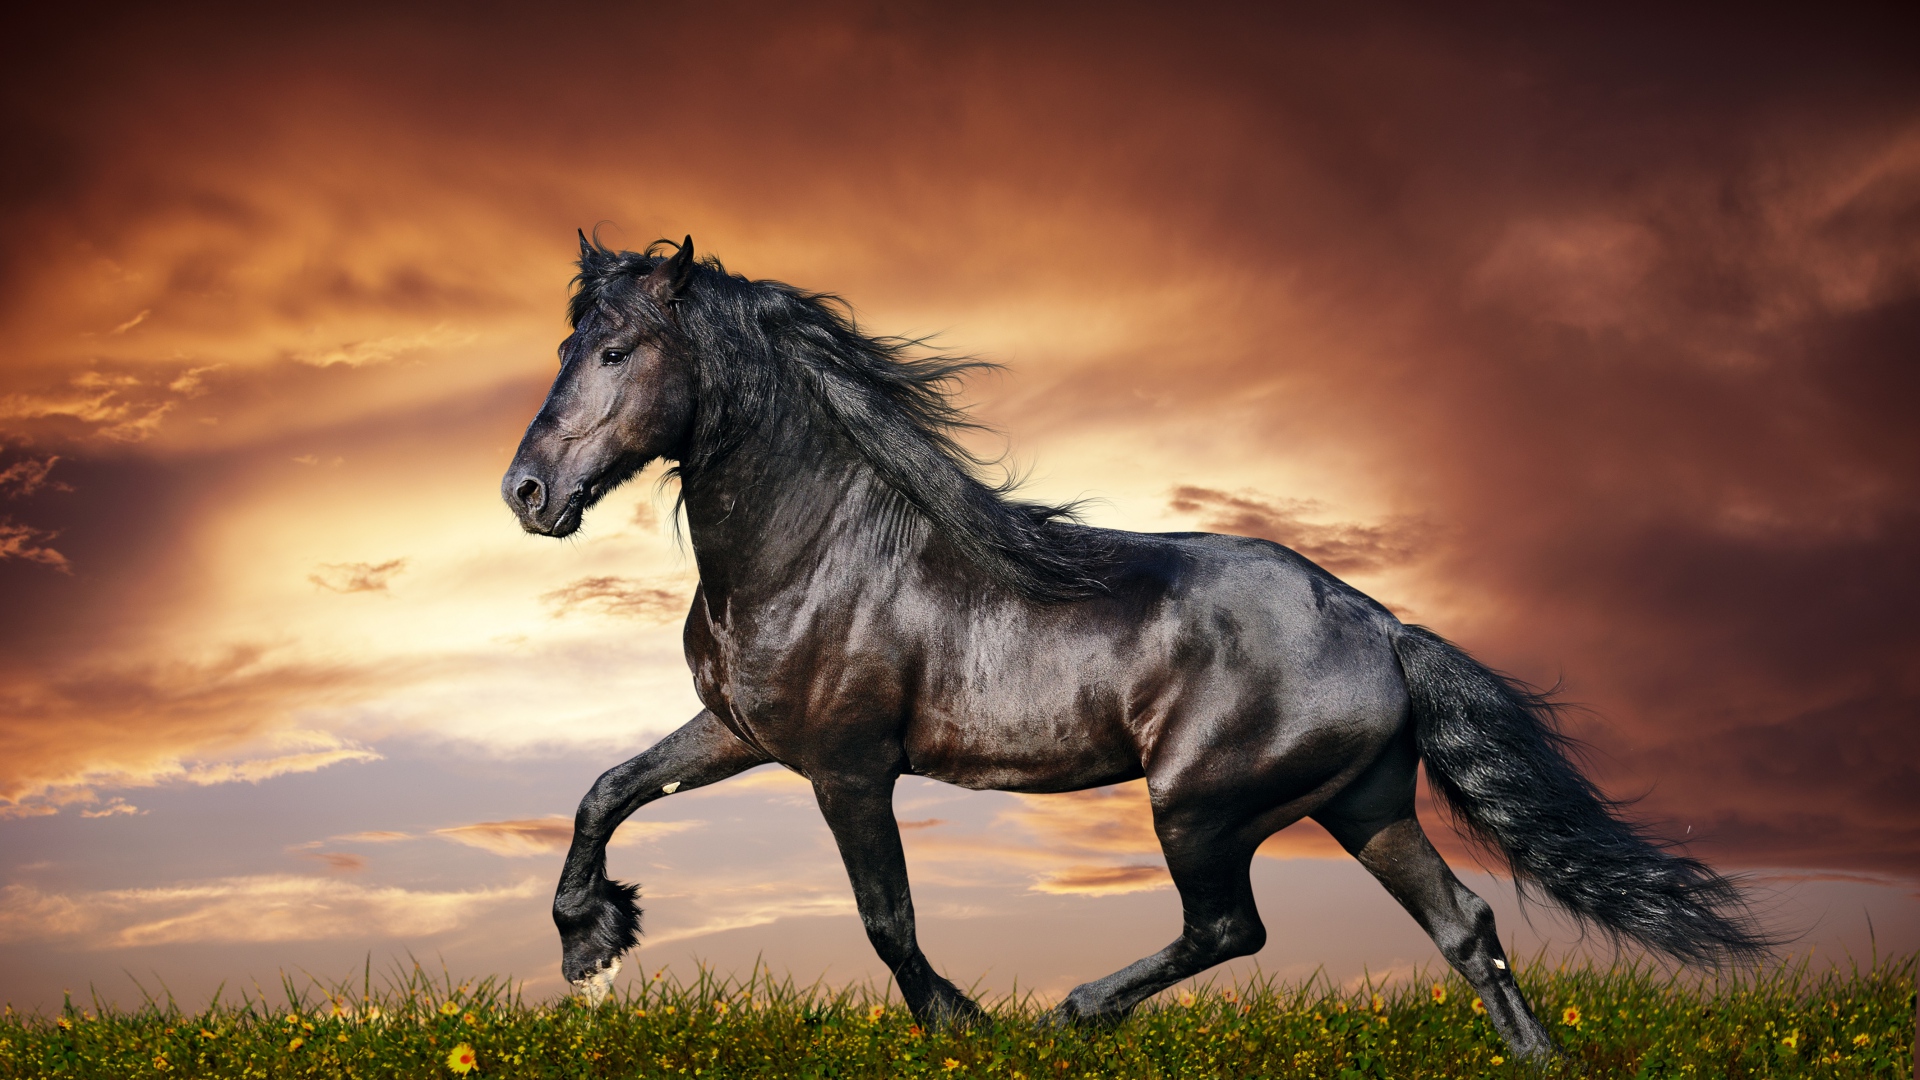 Horse Wallpaper HD Pictures One